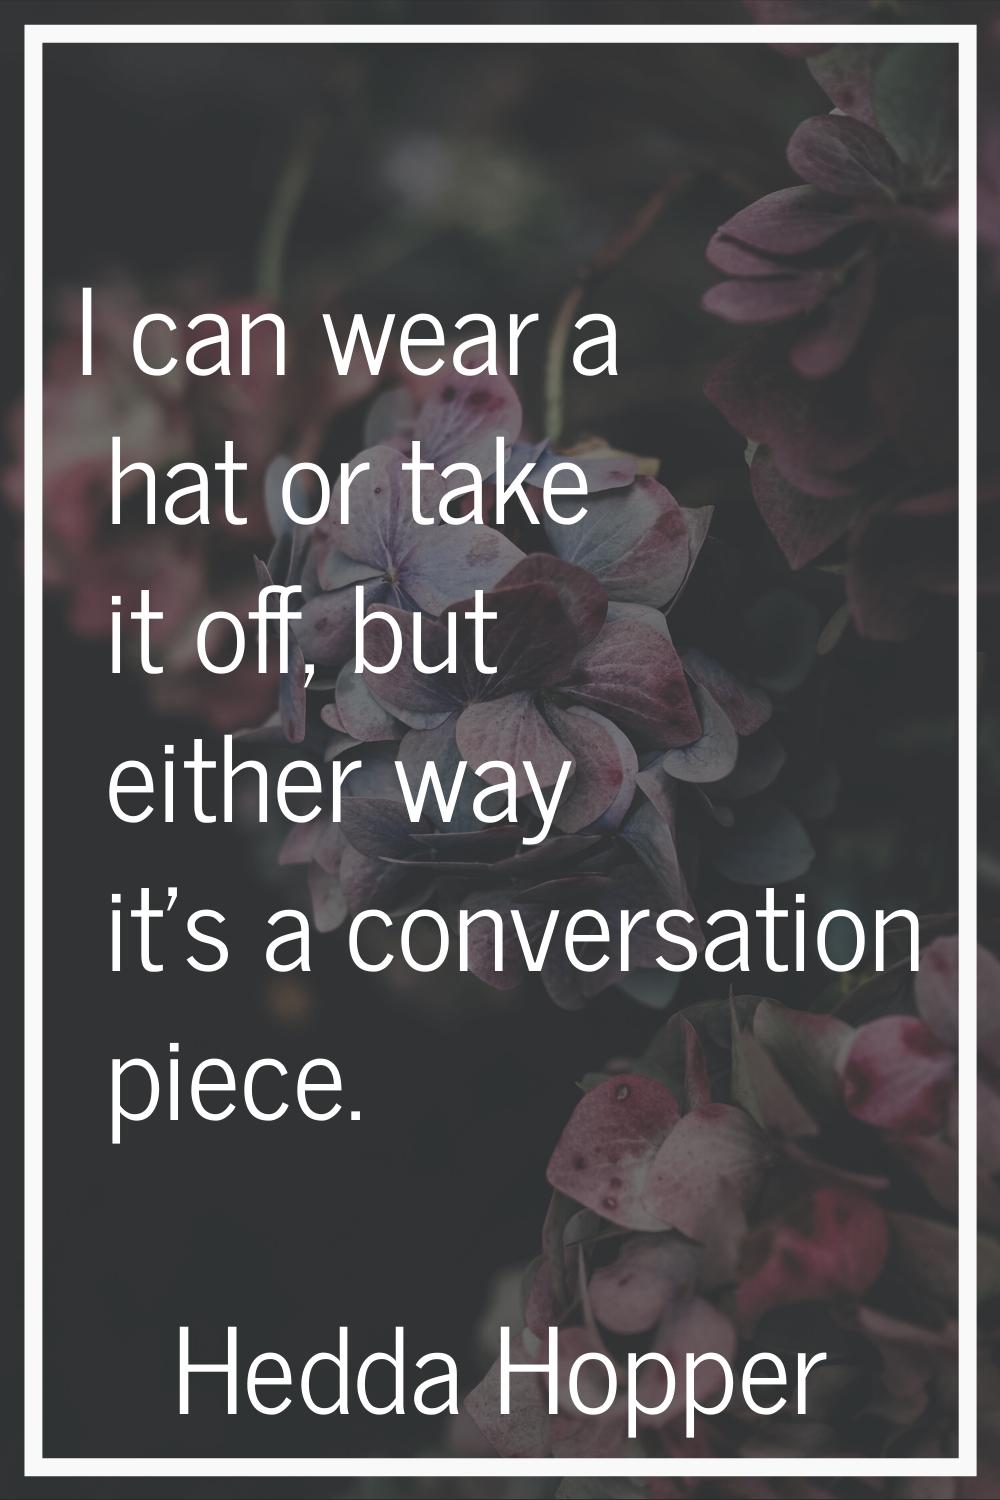 I can wear a hat or take it off, but either way it's a conversation piece.